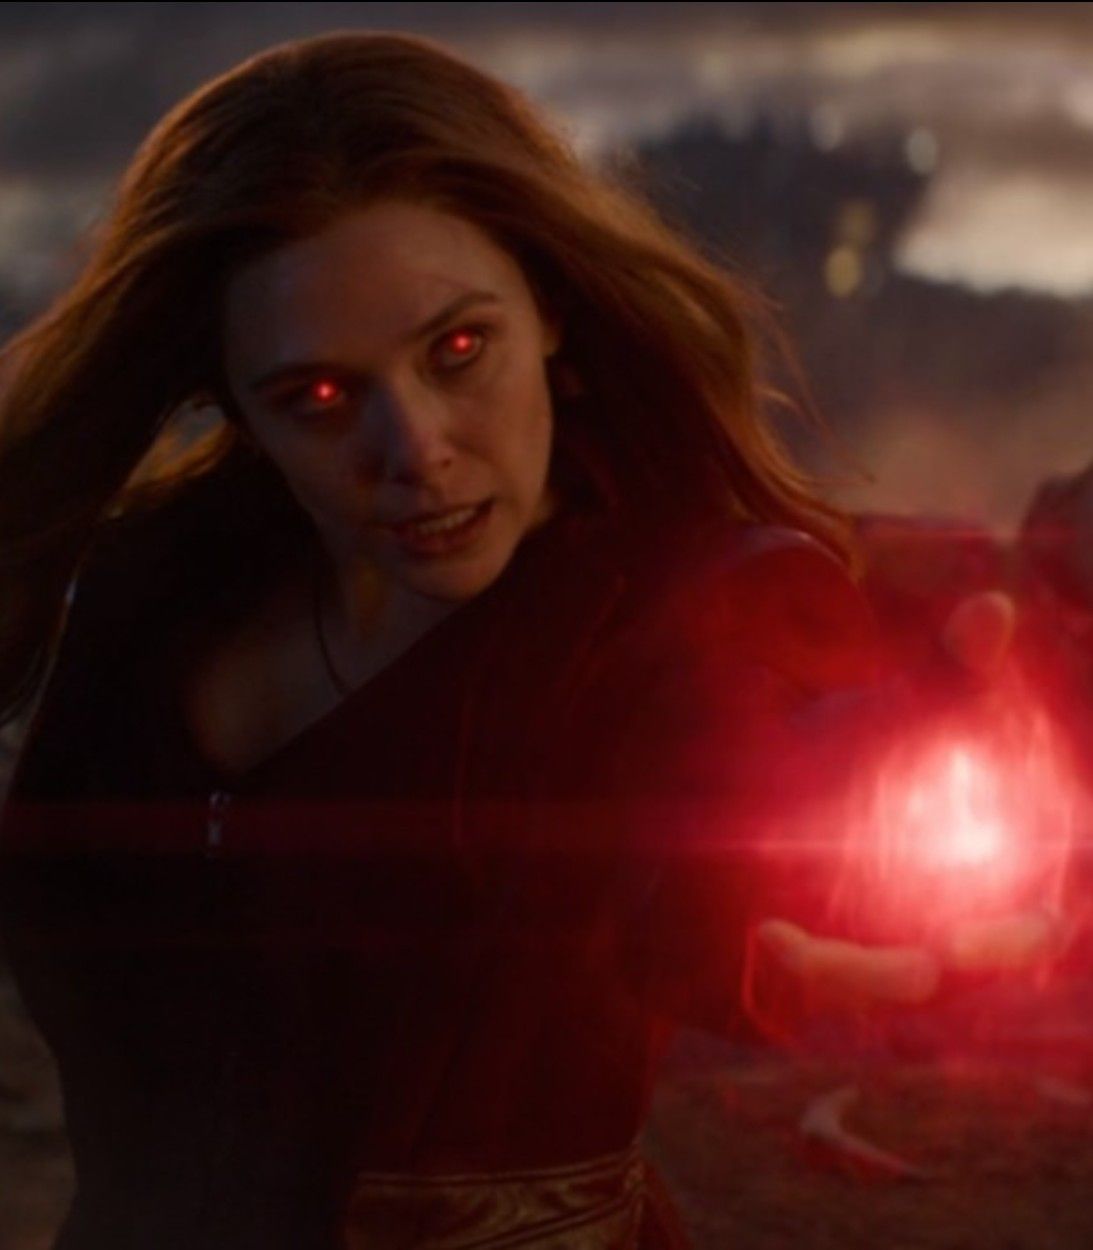 WandaVision Explores Scarlet Witch’s Past & Full Strength Powers